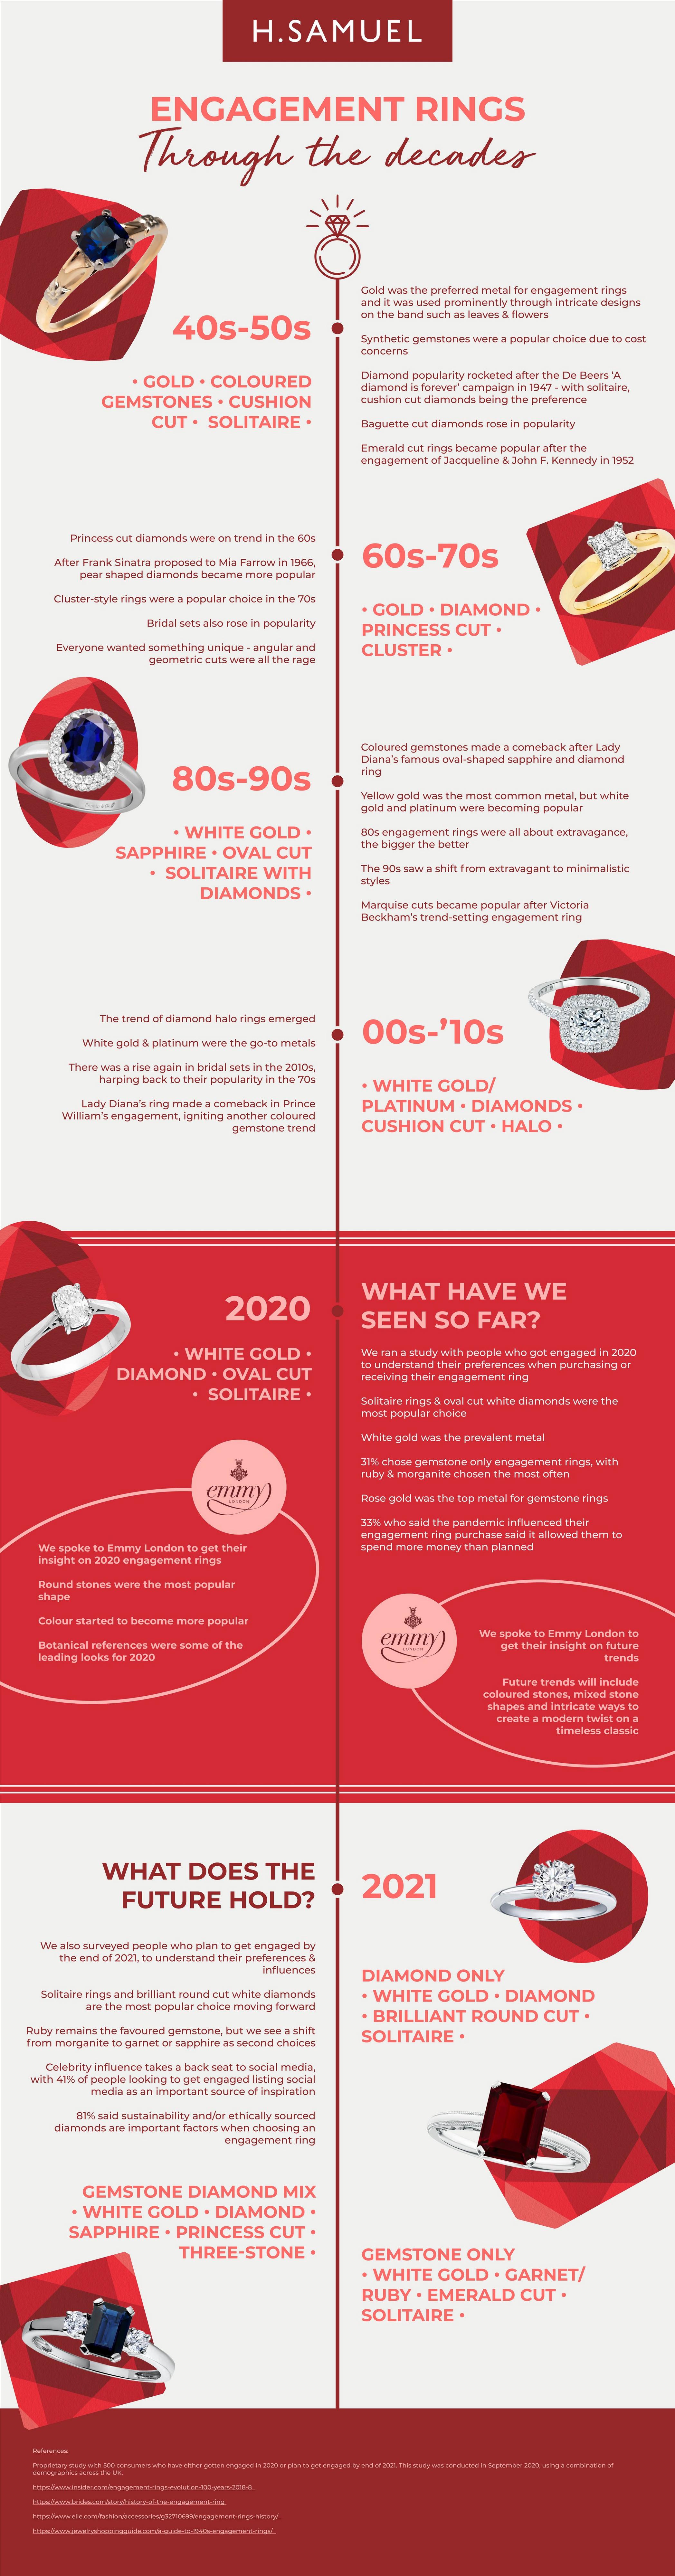 engagement rings timeline infographic explaining engagement ring trends through the decades